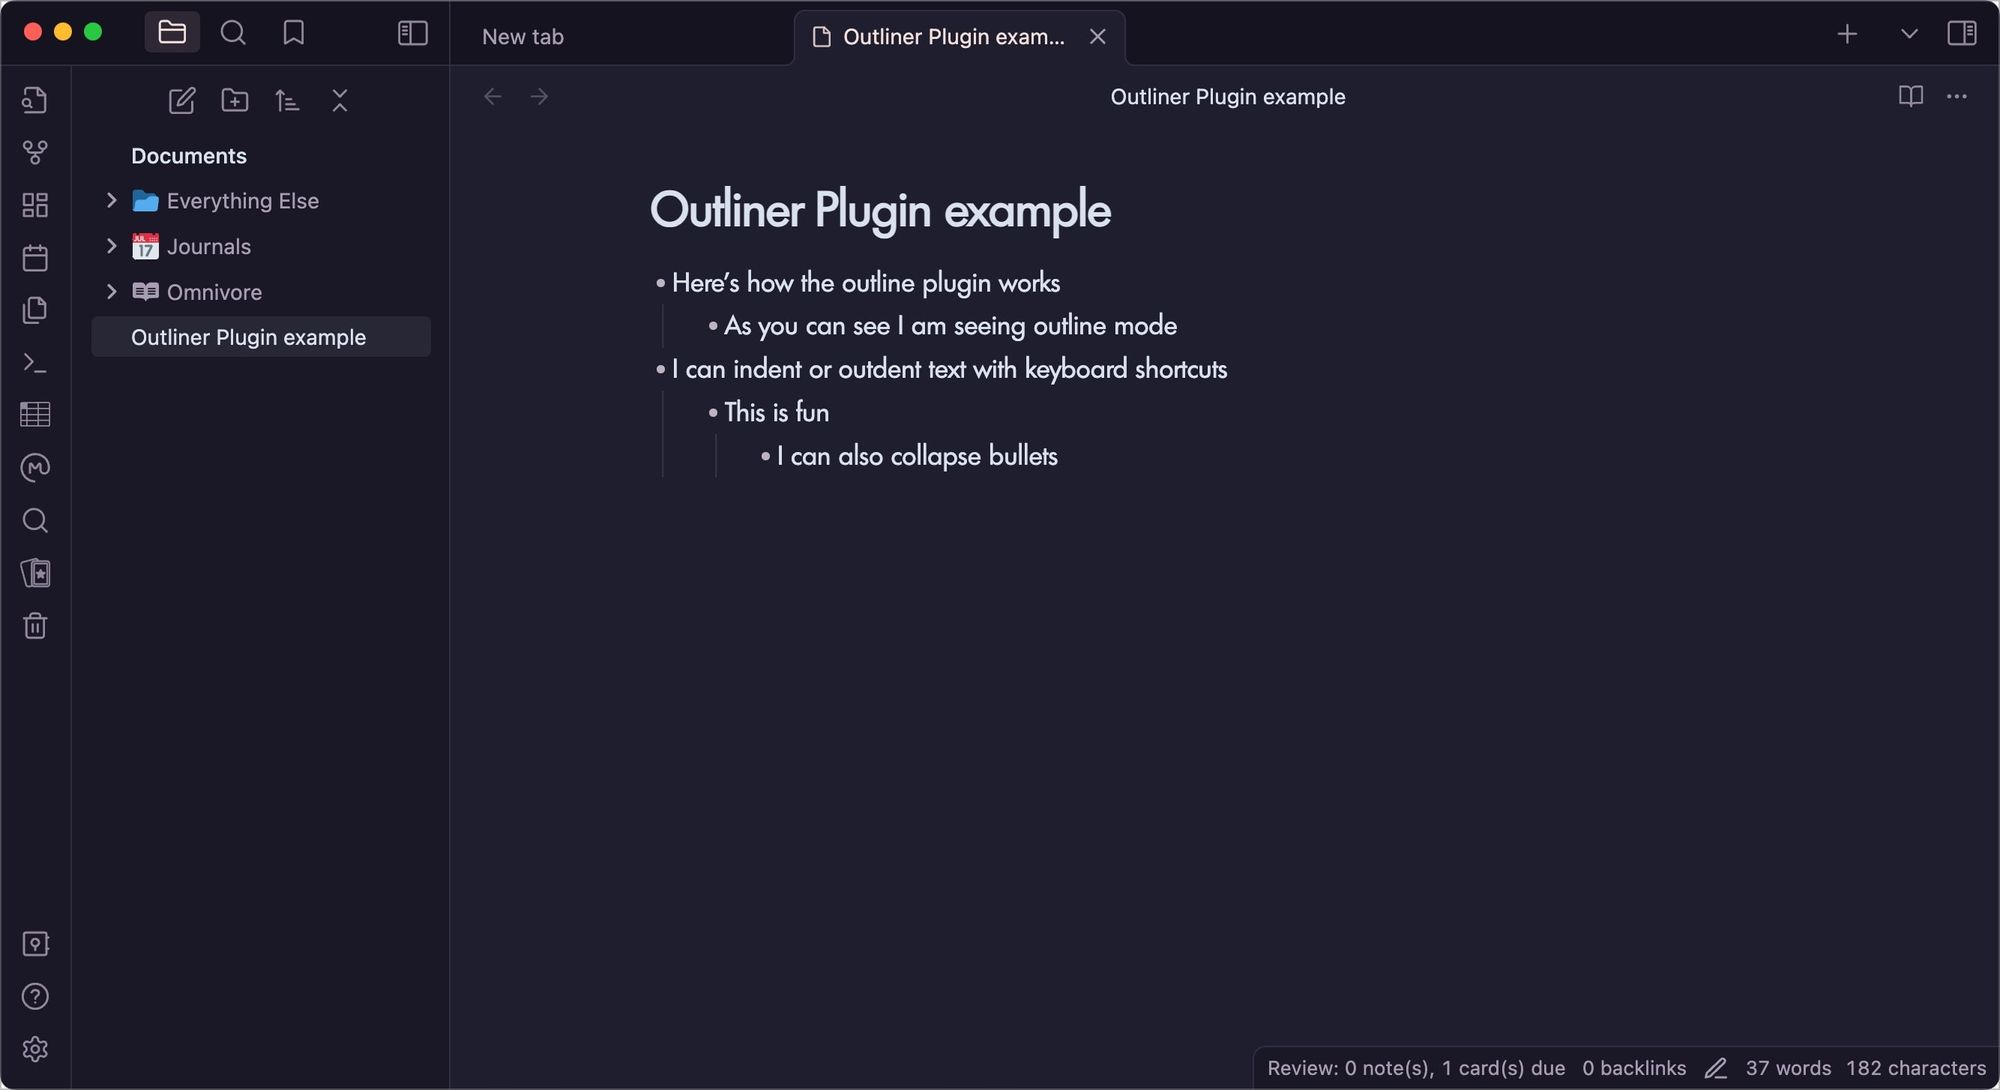 Outliner Plugin example